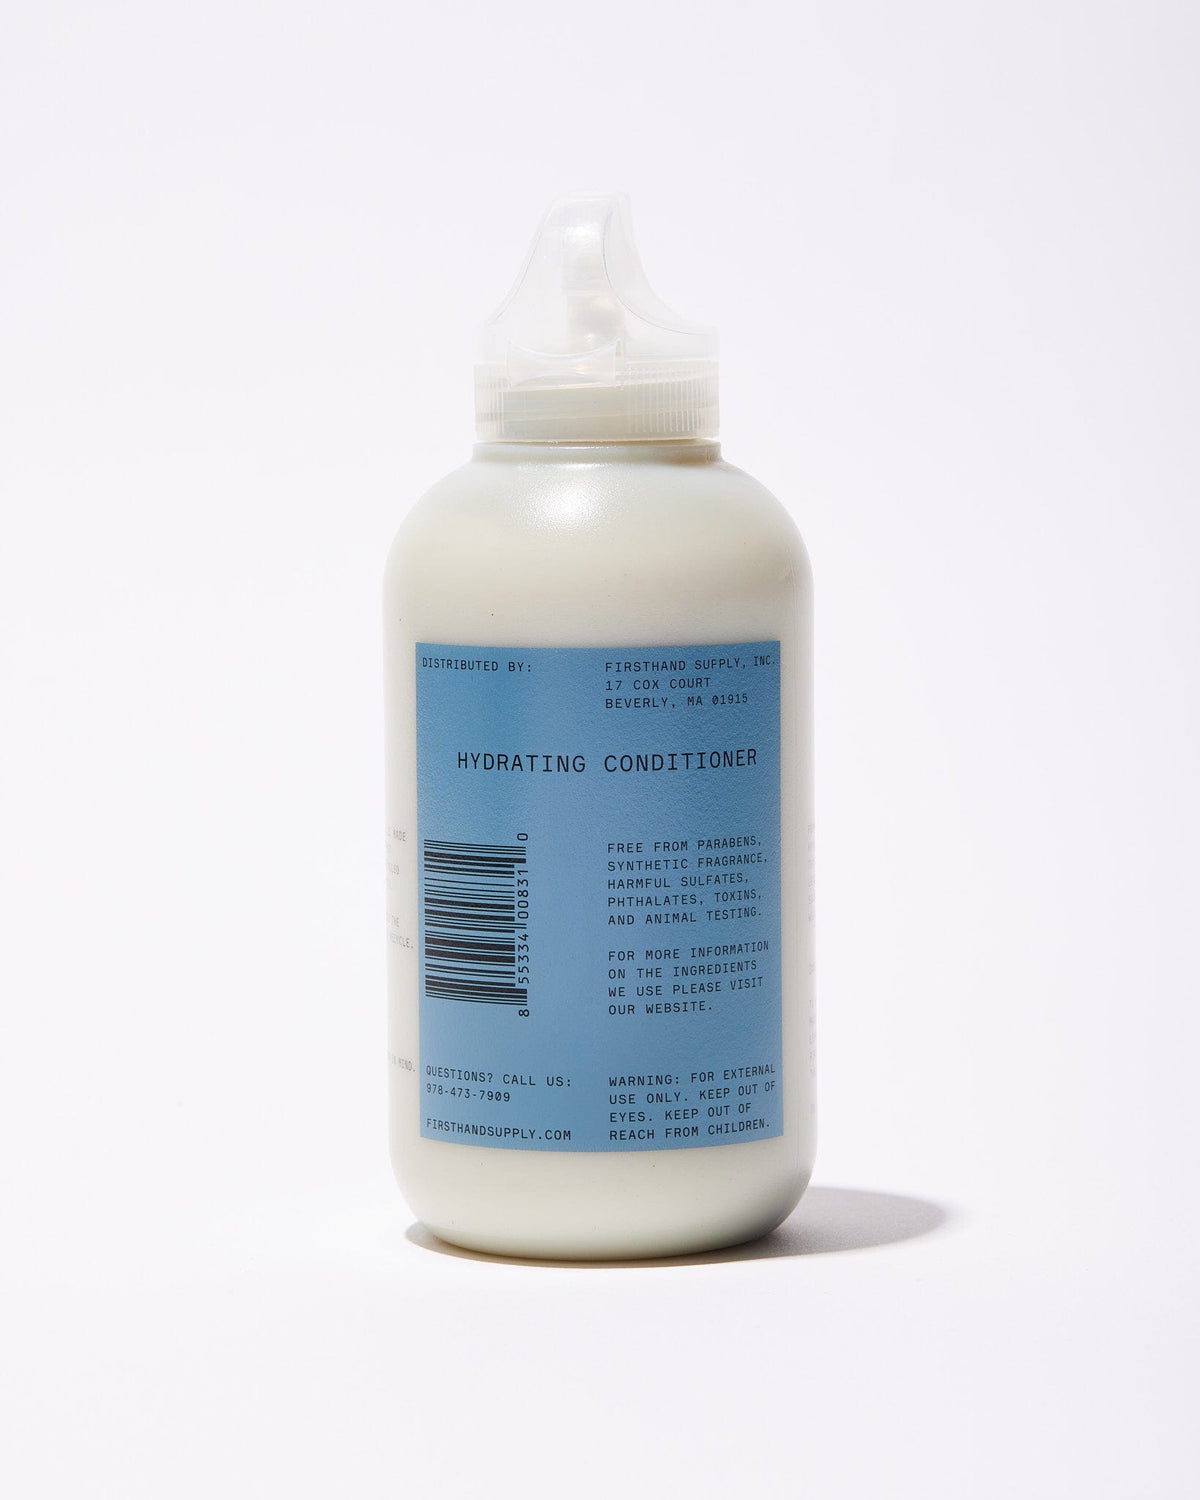 Hydrating Conditioner by Firsthand Supply